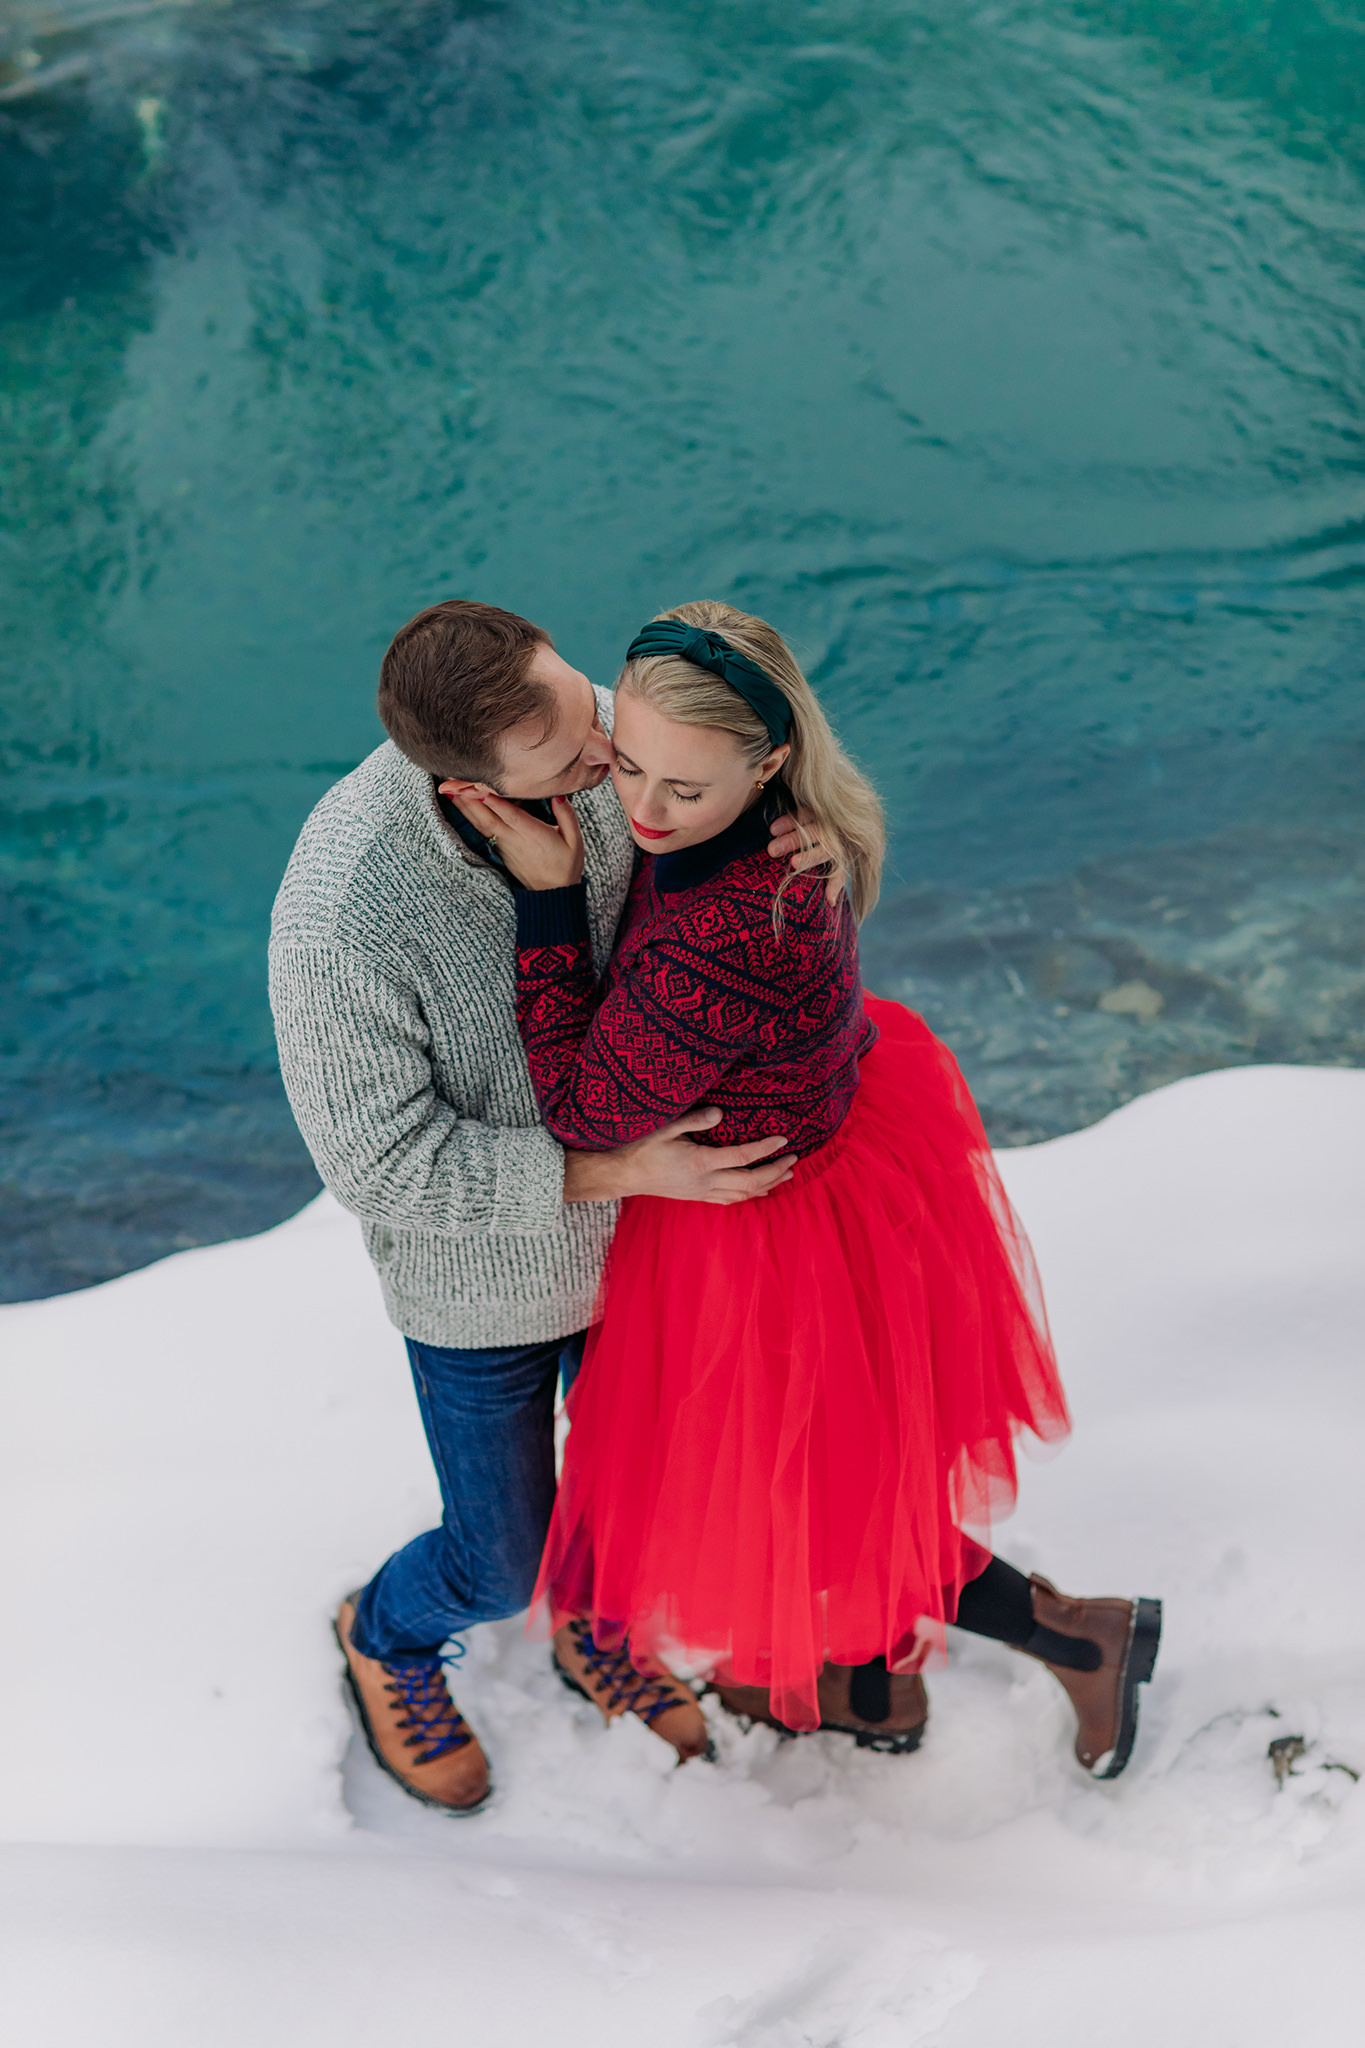 snowy natural bridge couples photos with freshly frozen lake featuring playful red tulle skirt & nordic sweater